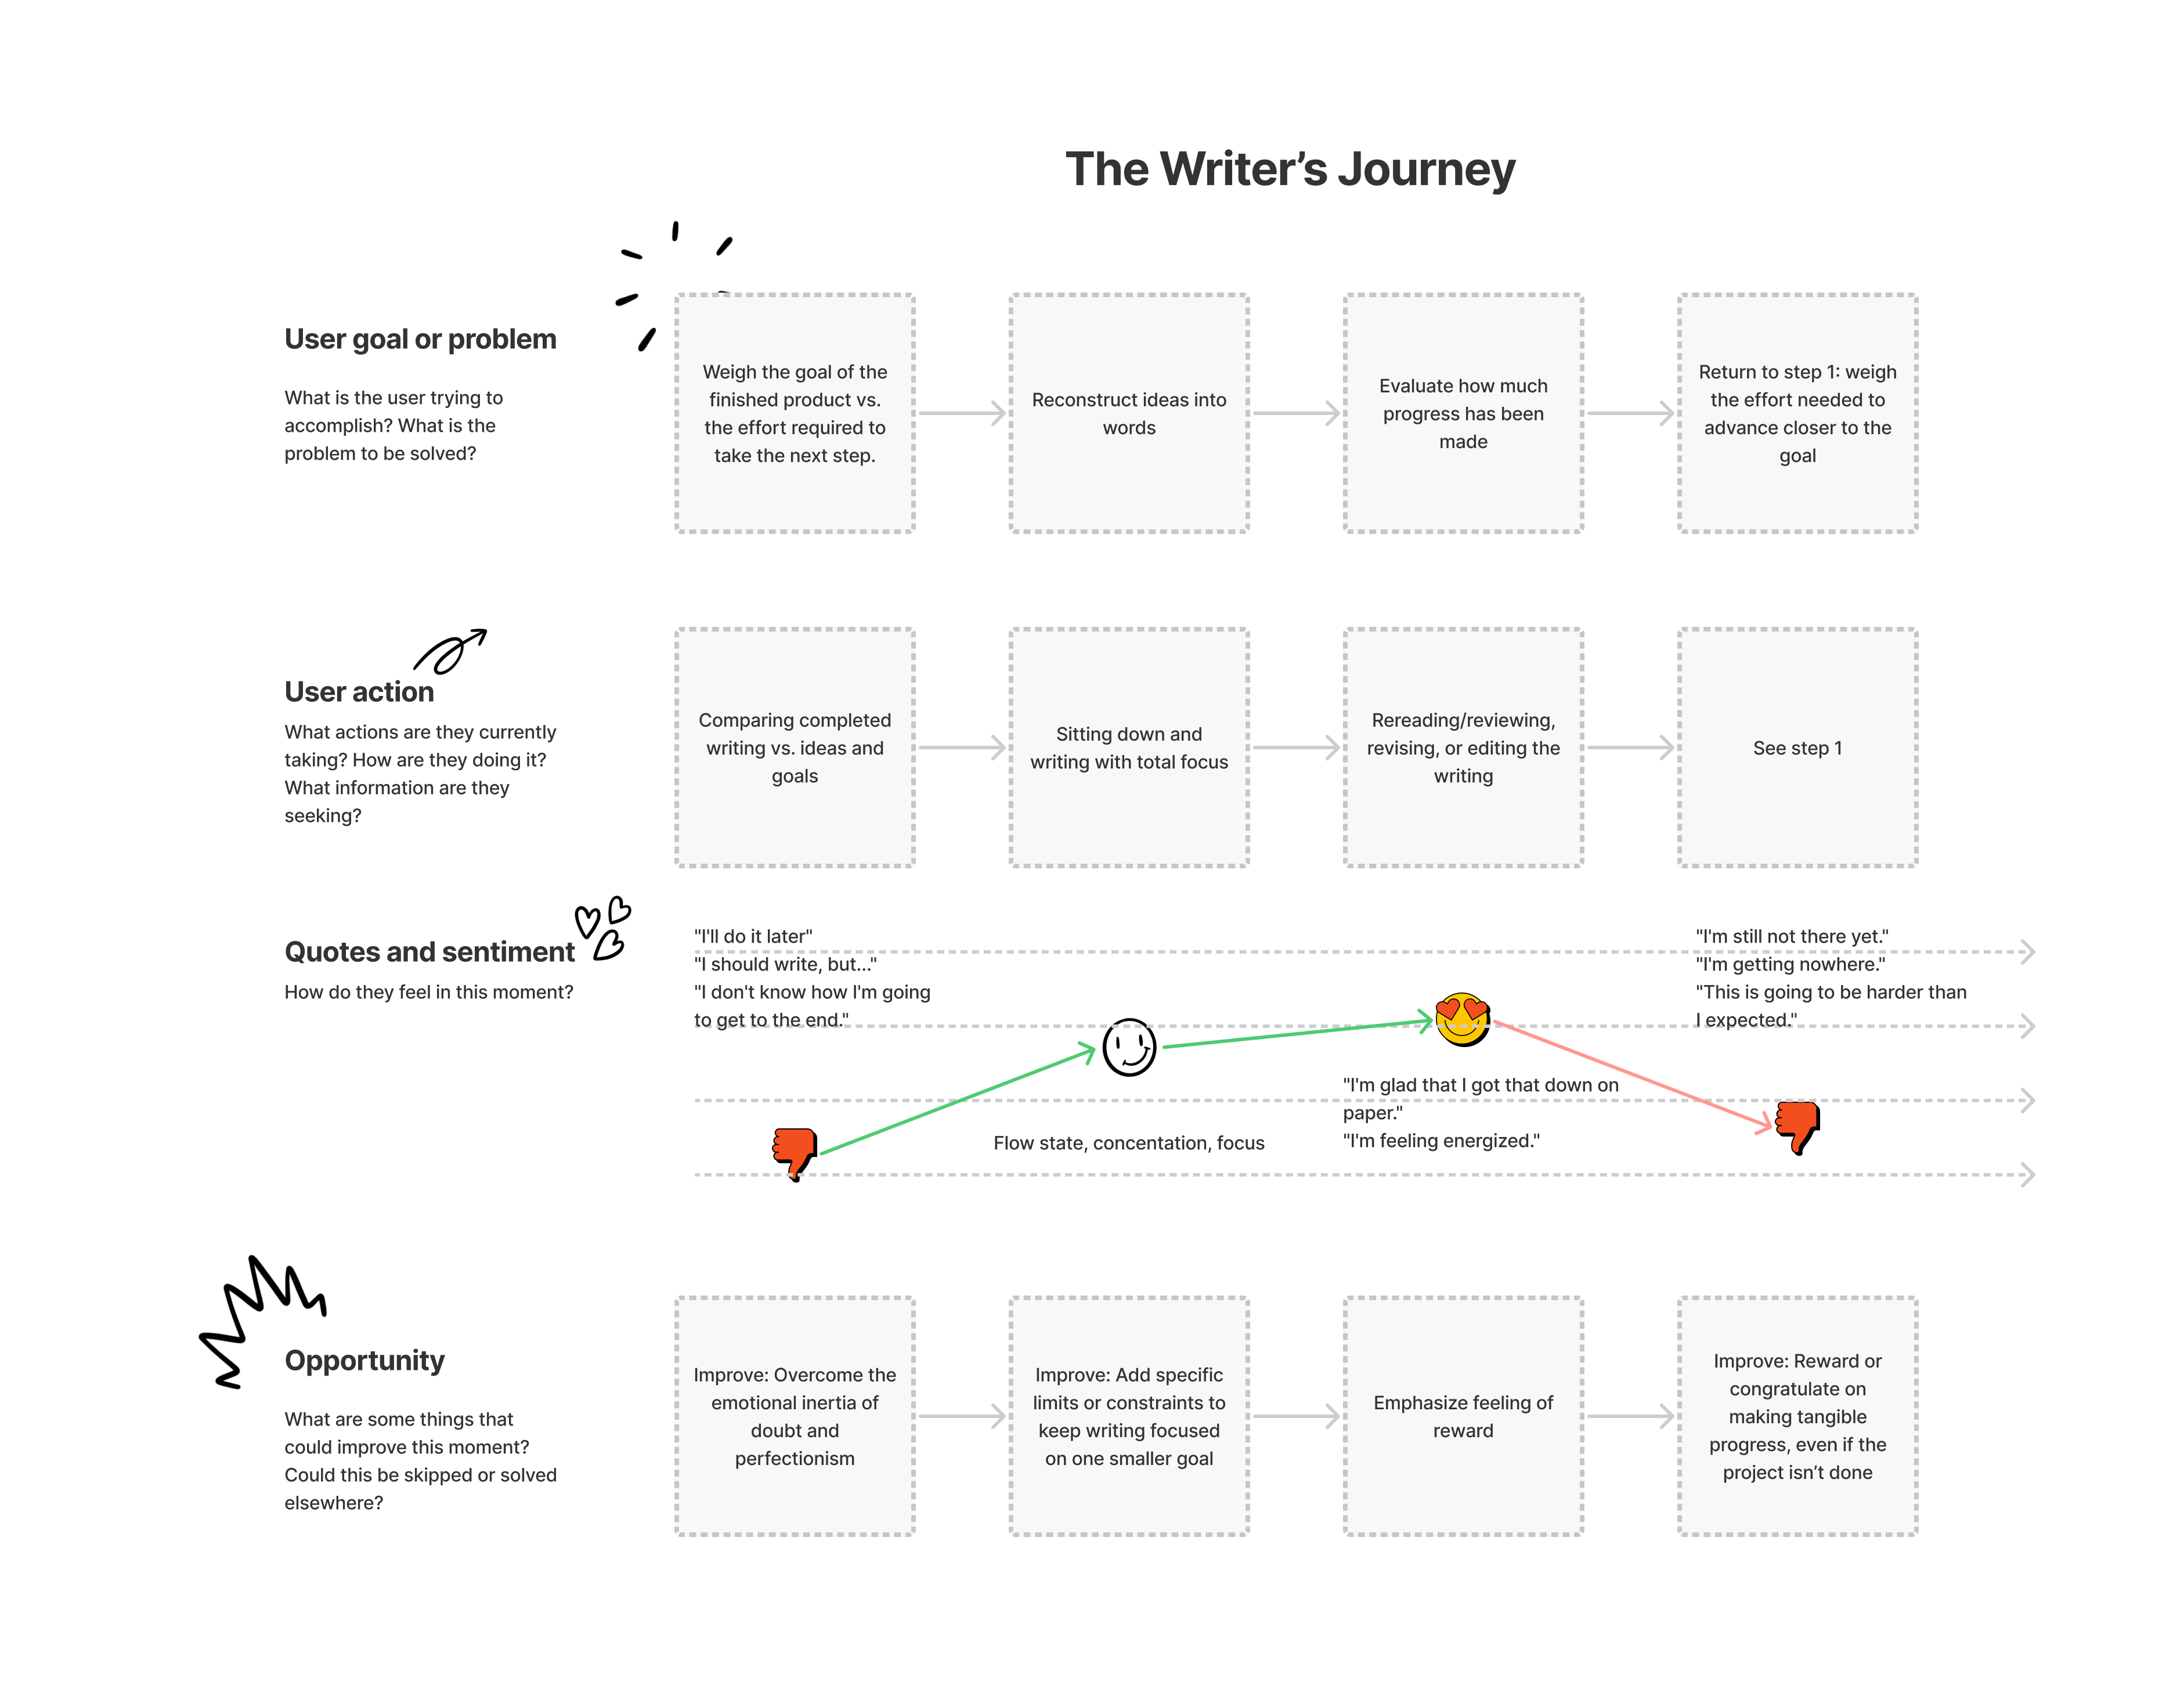 A journey map detailing the task of writing. While writing can be a fluid and enjoyable activity, it's also vulnerable to unproductive thoughts emotions like self-comparison and impatience.